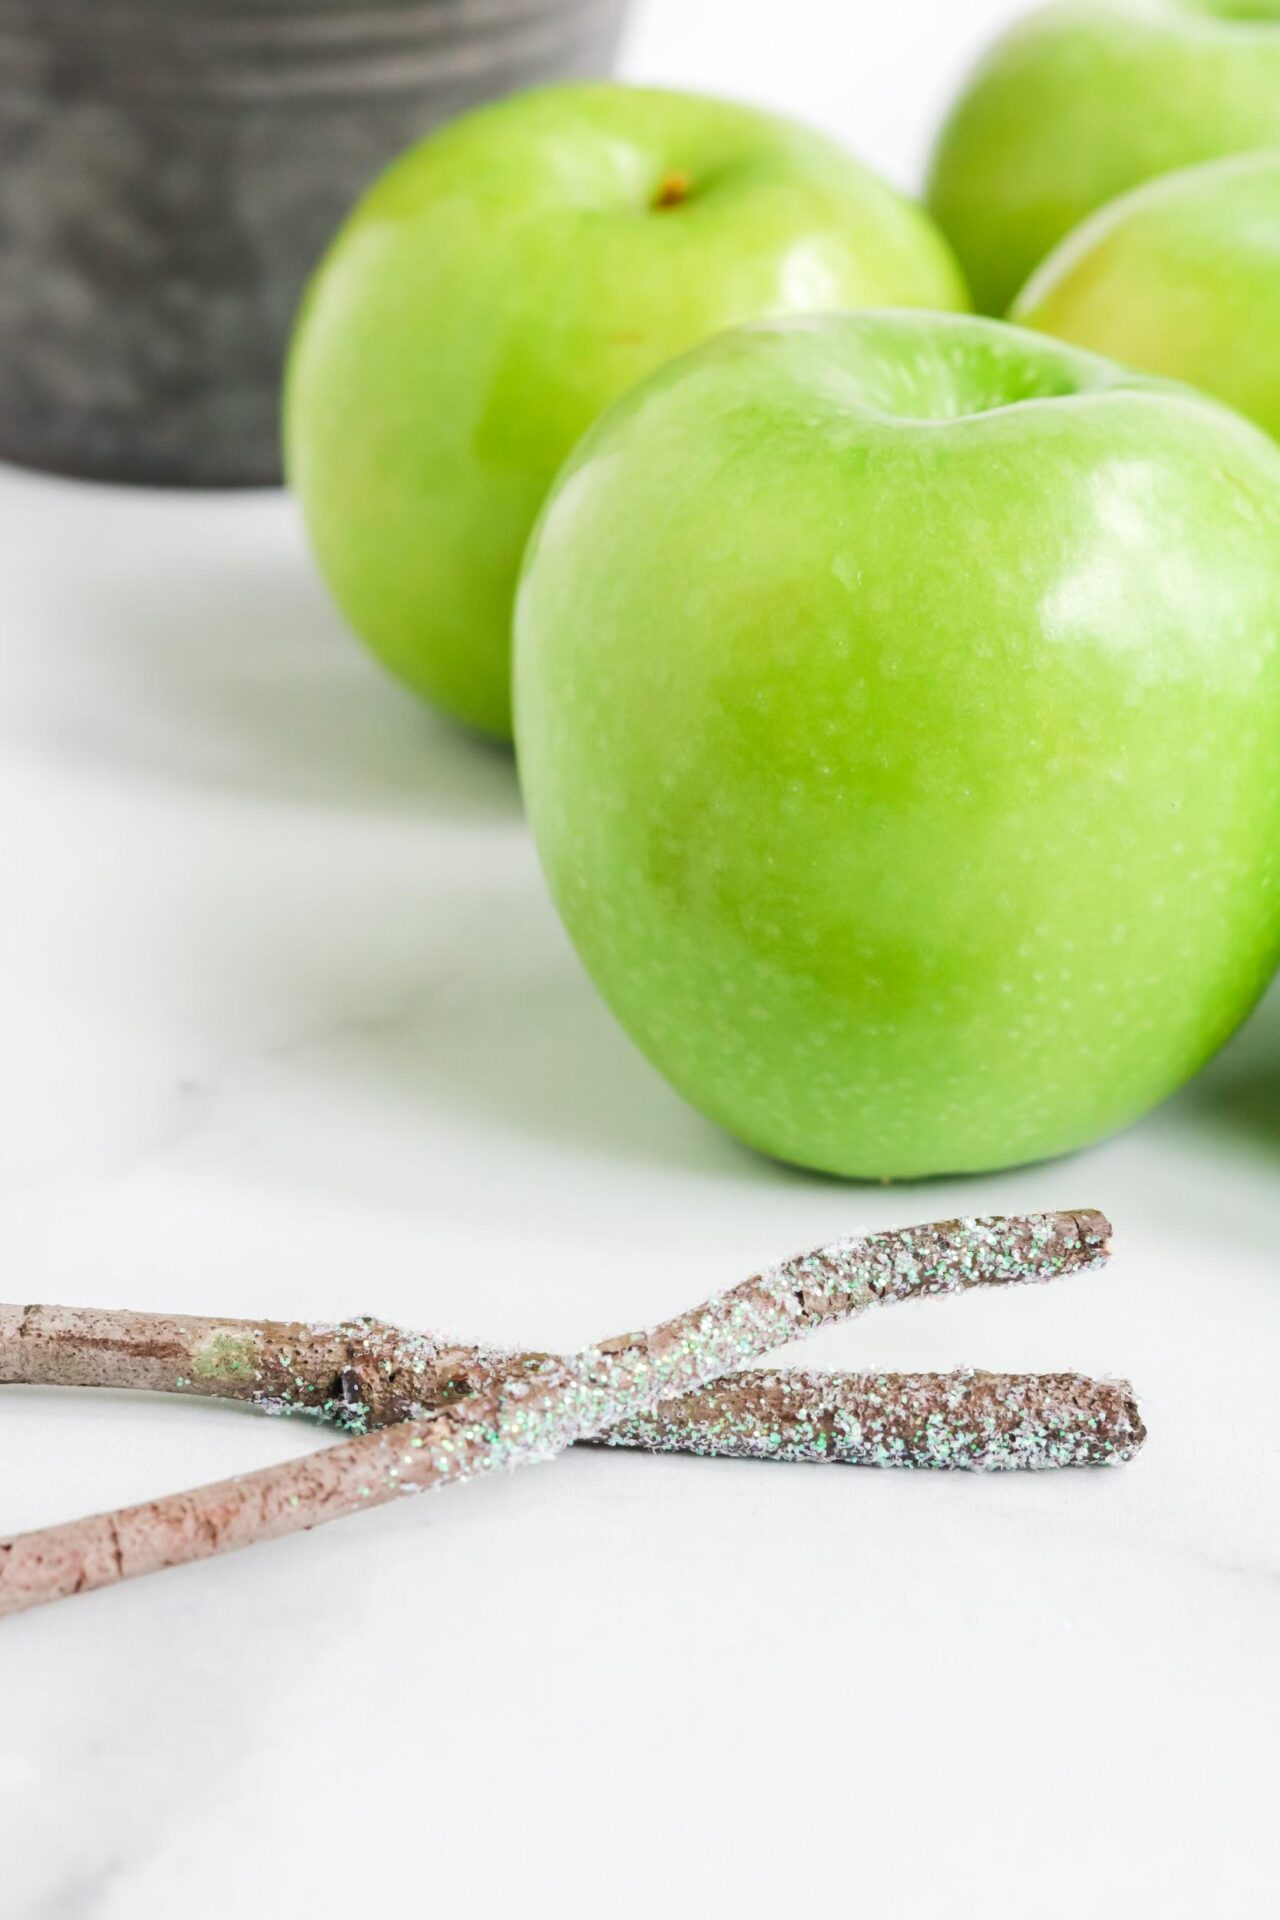 granny smith apples and wooden glitter sticks